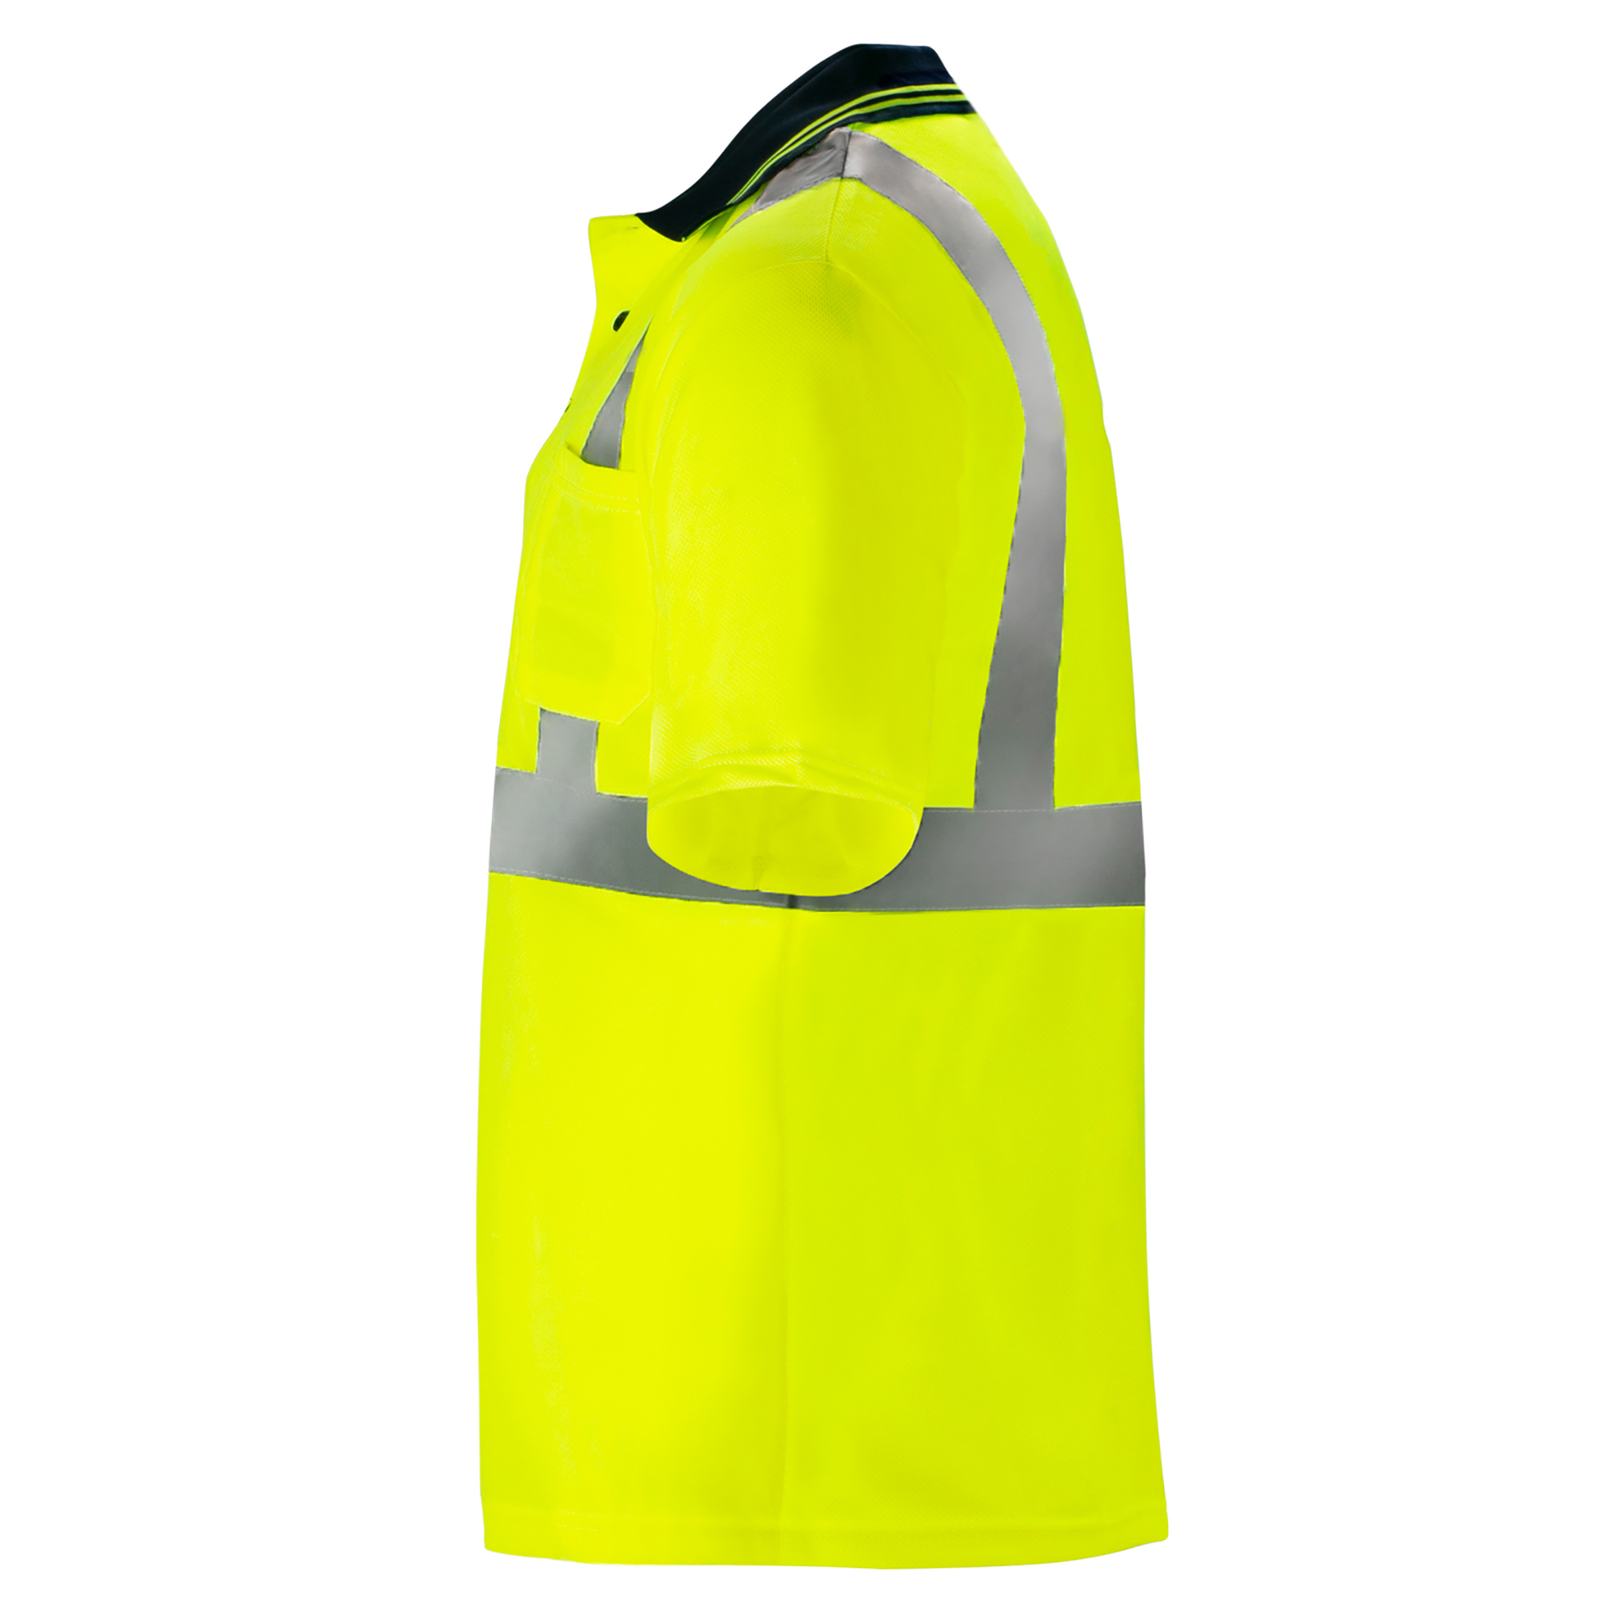 Side view of a hi vis yellow reflective safety polo shirt. The shirt is short sleeve, has a polo collar and buttons.